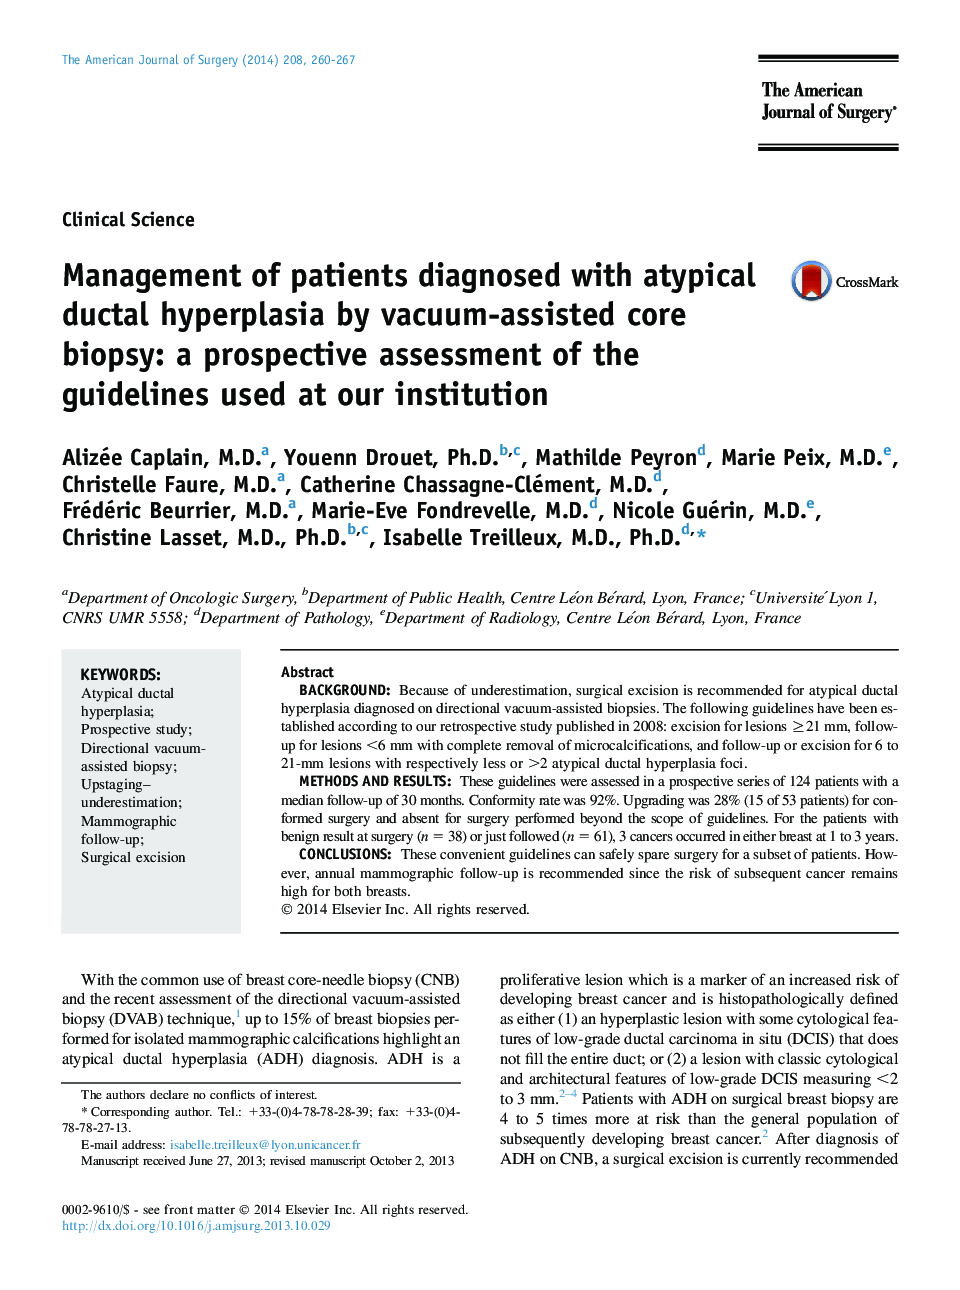 Management of patients diagnosed with atypical ductal hyperplasia by vacuum-assisted core biopsy: a prospective assessment of the guidelines used at our institution 